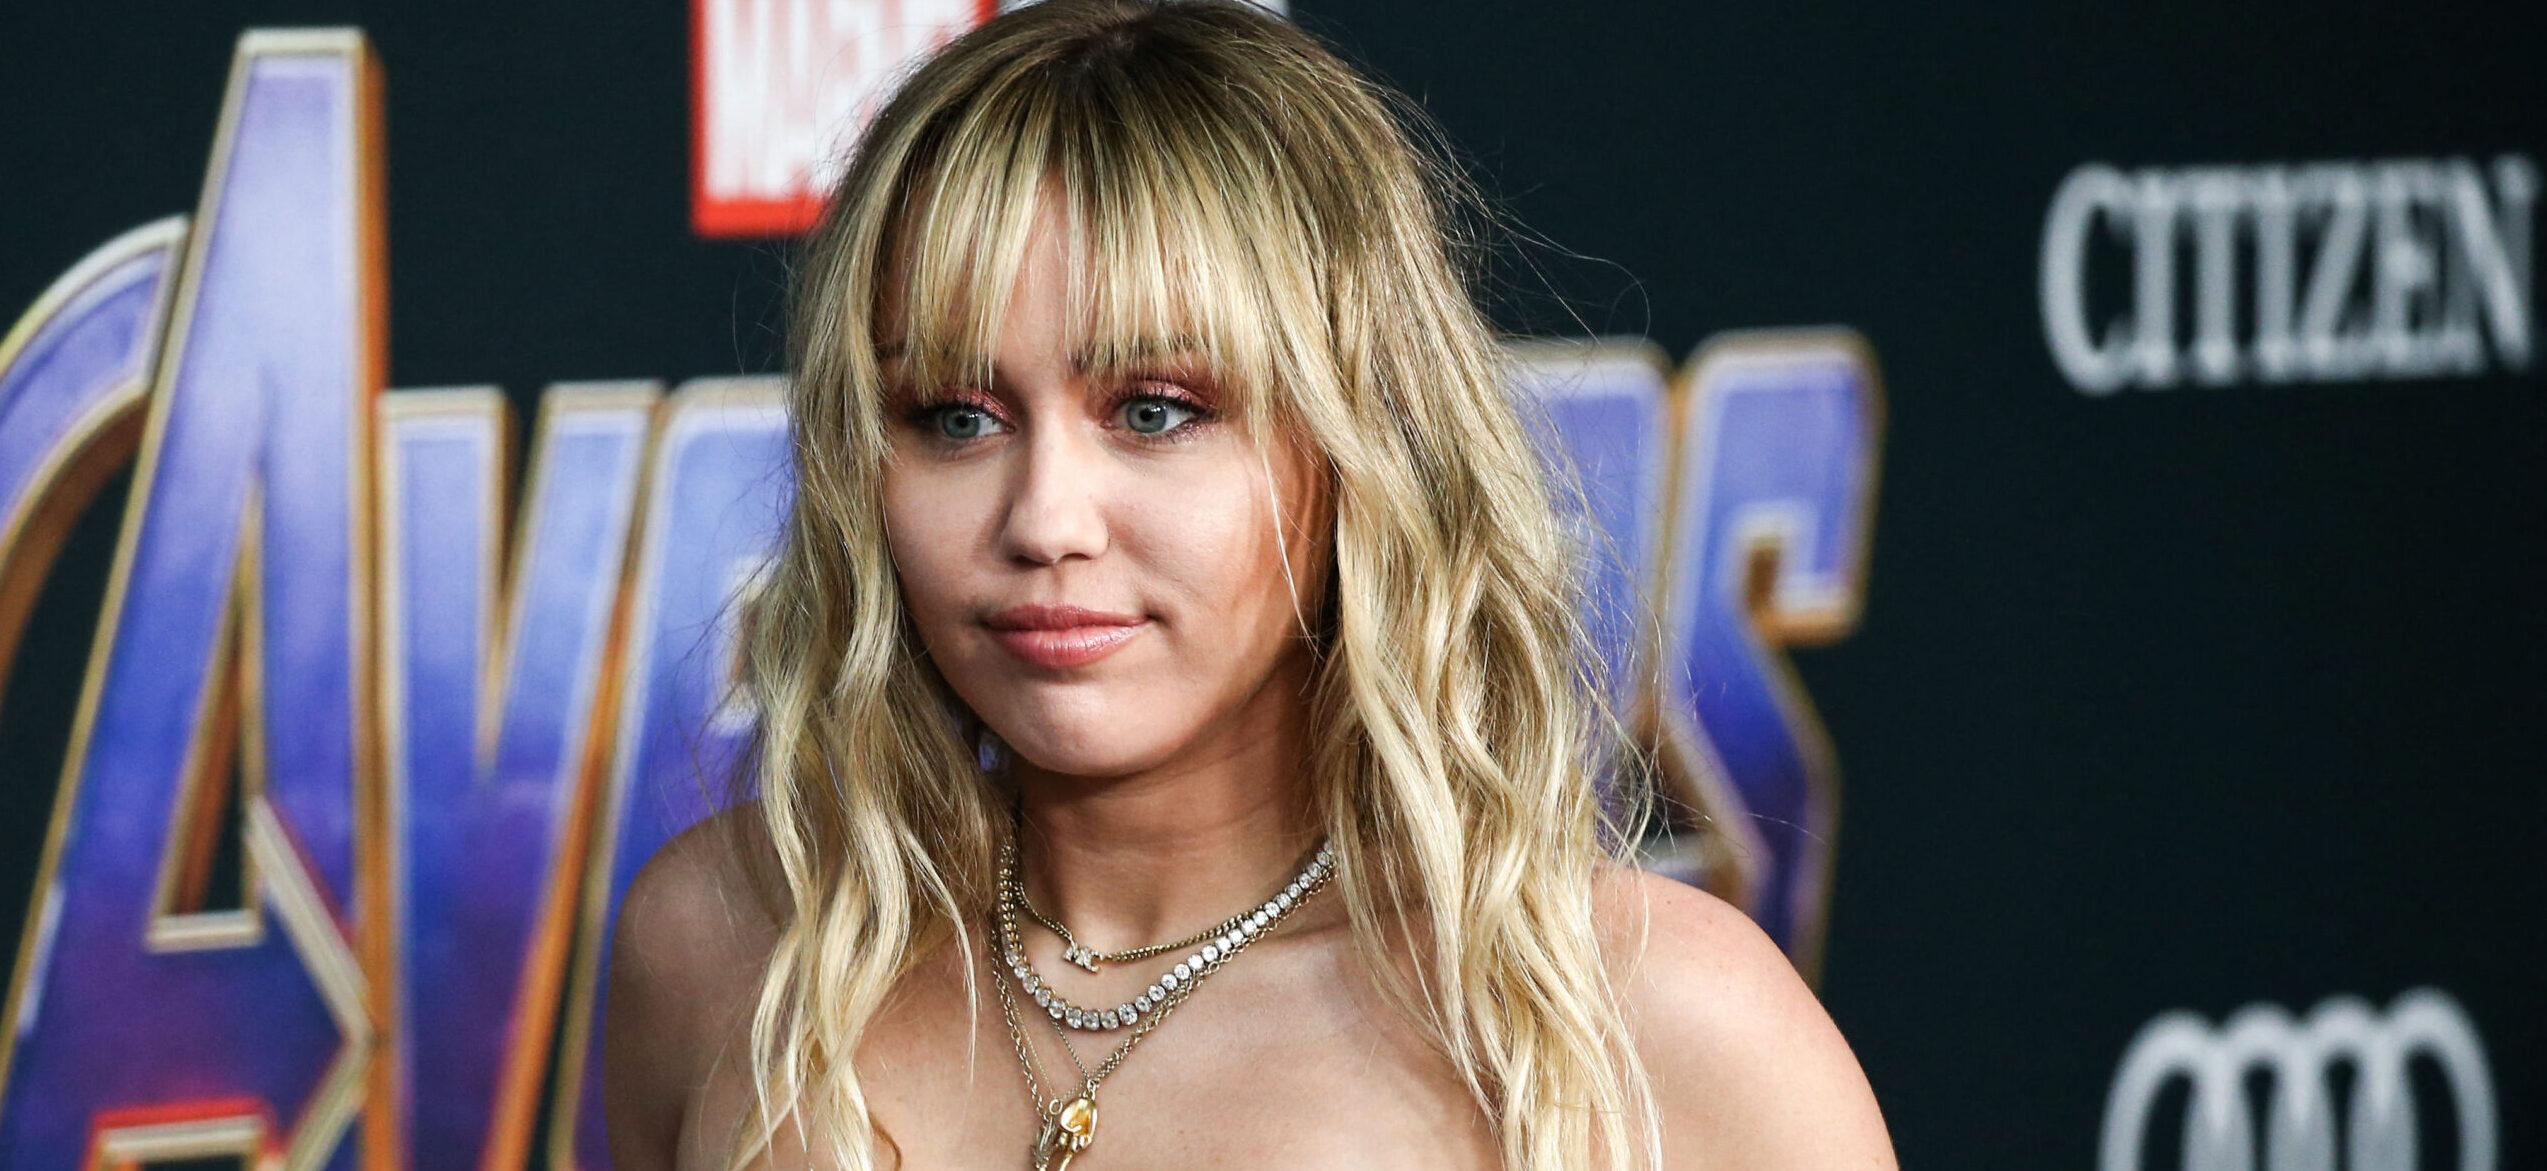 Miley Cyrus Granted 3-Year Restraining Order Against Obsessed Fan